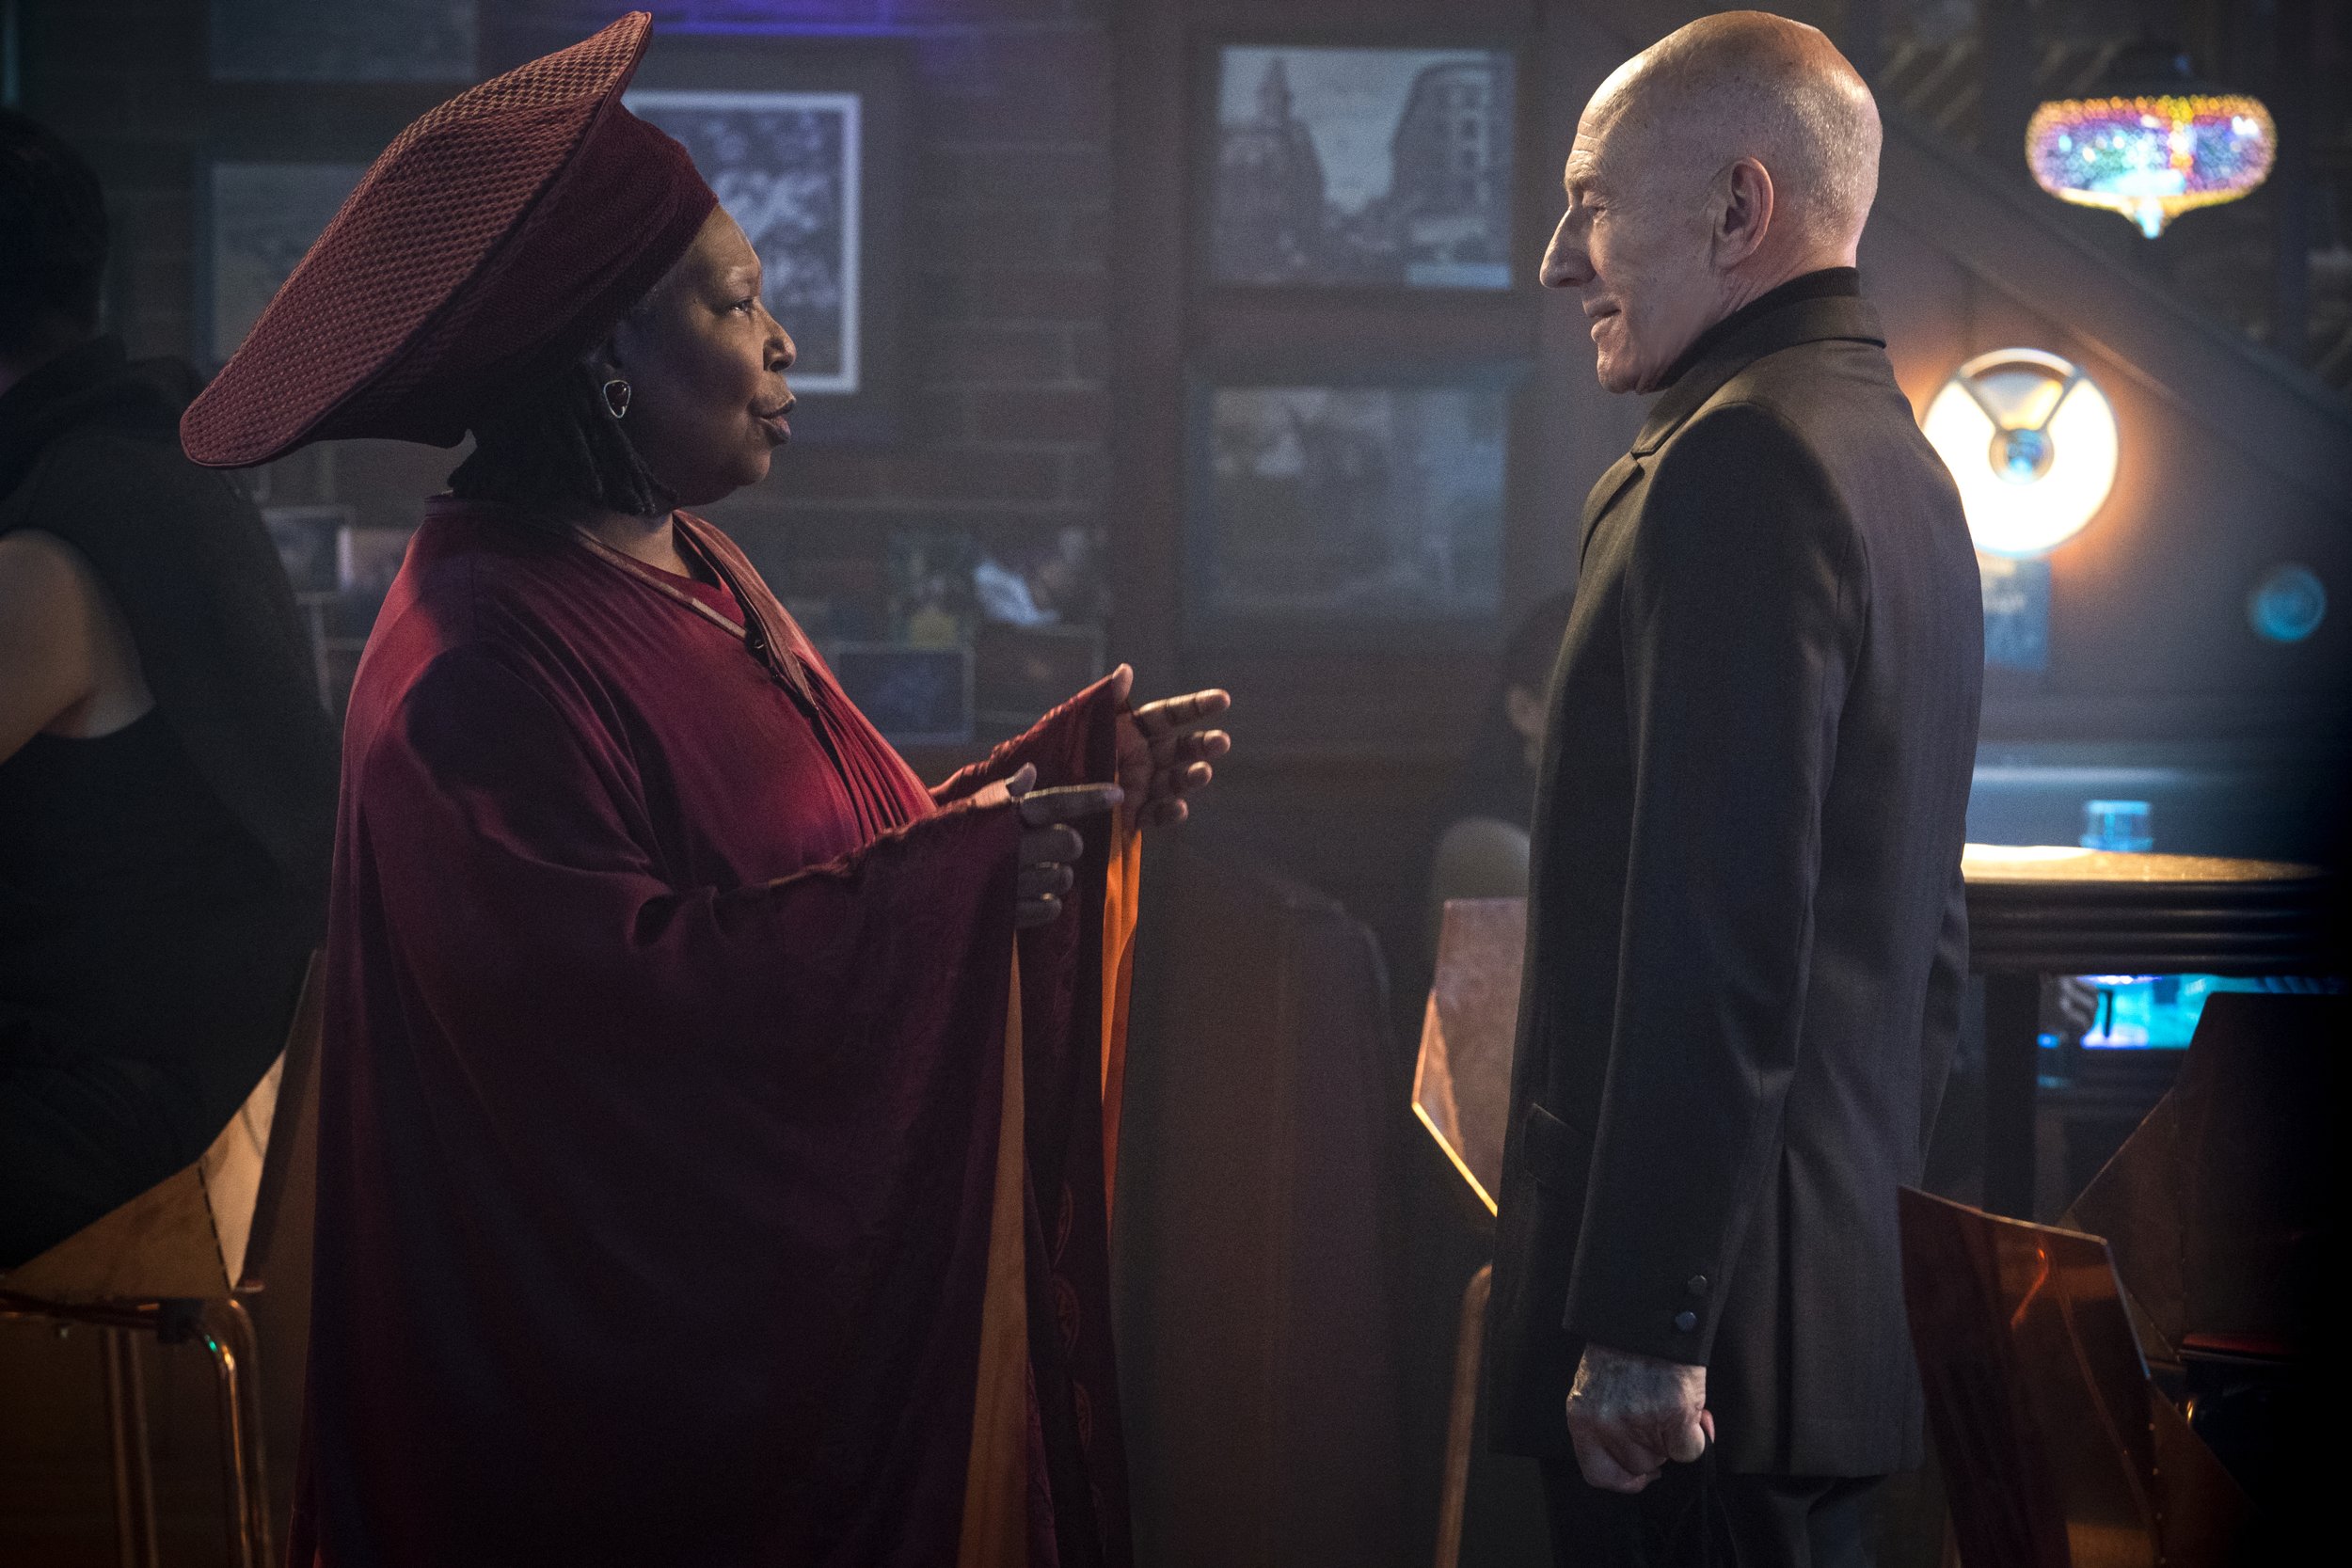   Pictured: Whoopi Goldberg as Guinan and Sir Patrick Stewart as Jean-Luc Picard of the Paramount+ original series STAR TREK: PICARD. Photo Cr: Nicole Wilder/Paramount+ (C)2022 ViacomCBS. All Rights Reserved.  